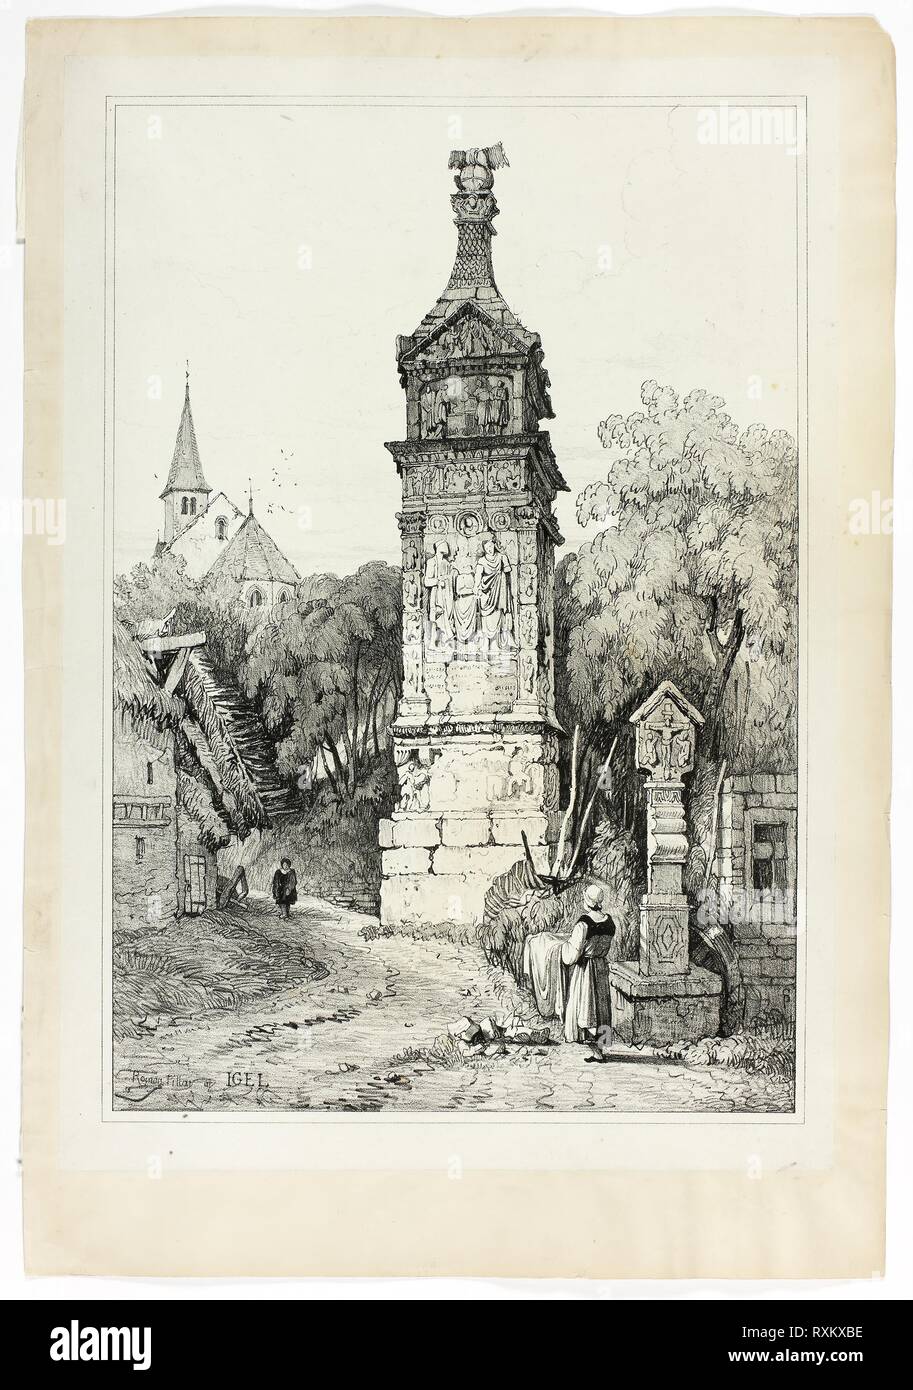 Roman Pillar at Igel. Samuel Prout (English, 1783-1852); probably printed by Charles Joseph Hullmandel (English, 1789-1850); probably published by Rudolph Ackermann (English, 1764-1834). Date: 1833. Dimensions: 290 × 425 mm (image); 310 × 445 mm (primary support); 345 × 500 mm (secondary support). Lithograph in black on grayish-ivory chine, laid down on ivory wove paper. Origin: England. Museum: The Chicago Art Institute. Stock Photo